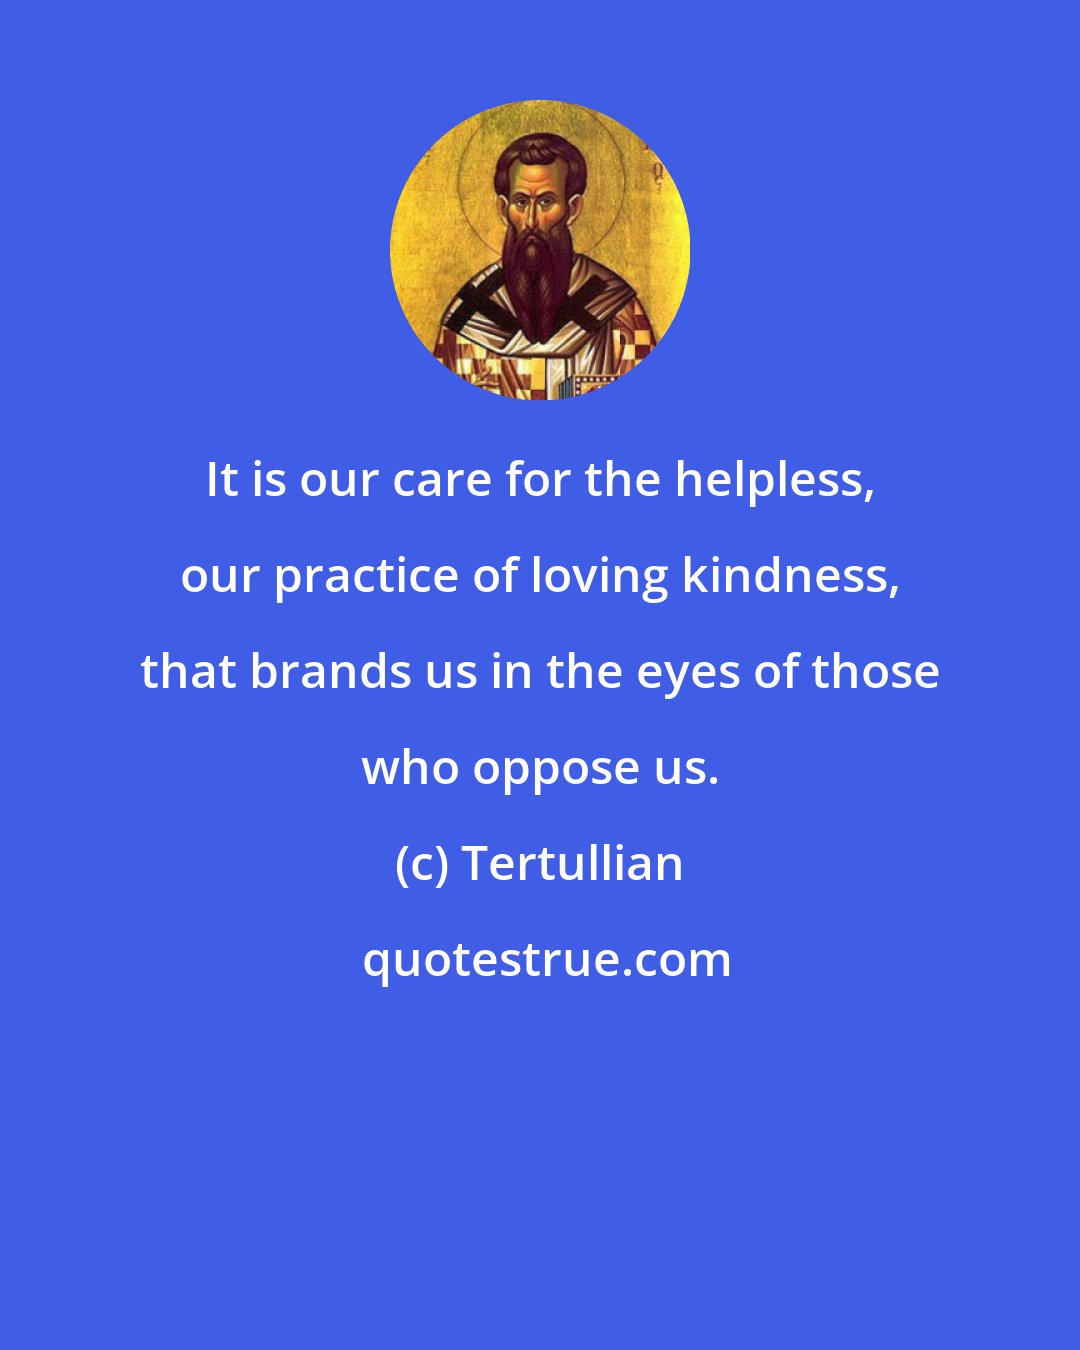 Tertullian: It is our care for the helpless, our practice of loving kindness, that brands us in the eyes of those who oppose us.